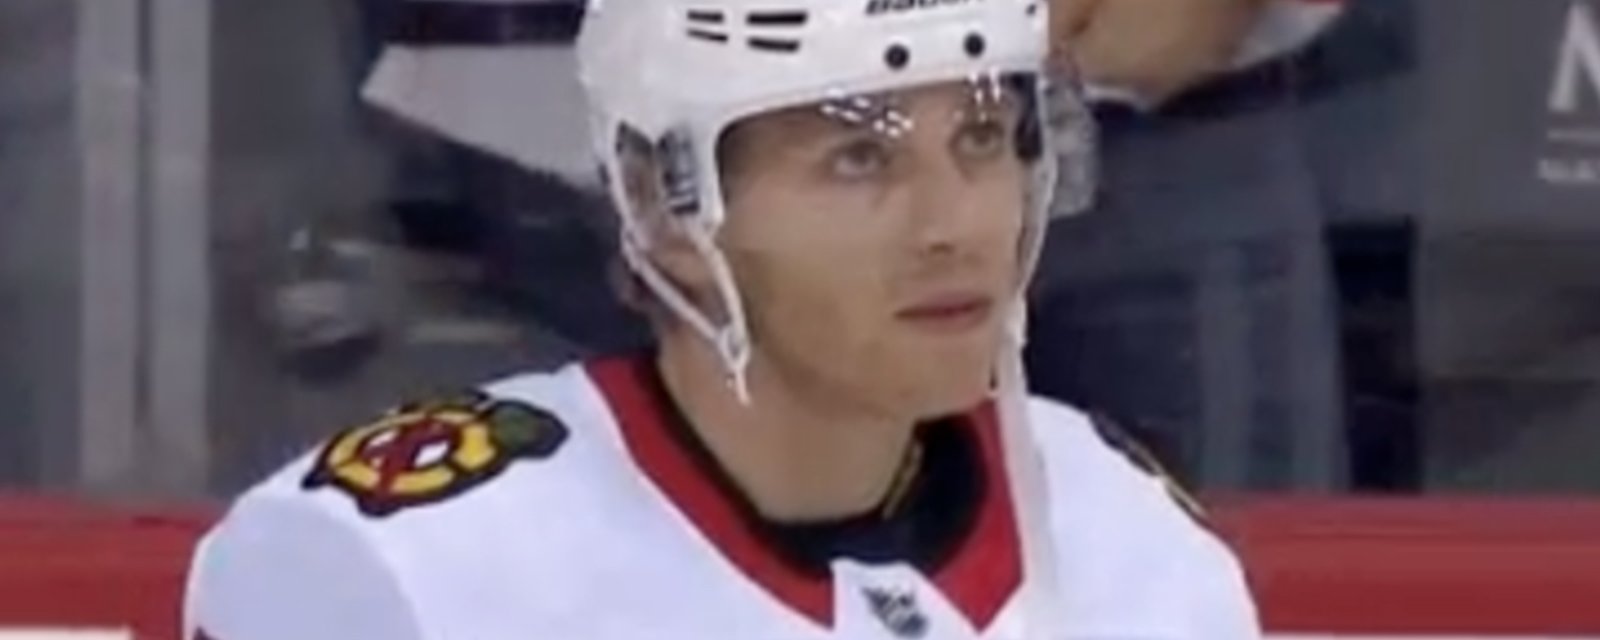 Patrick Kane gets NAILED in the face during warmup